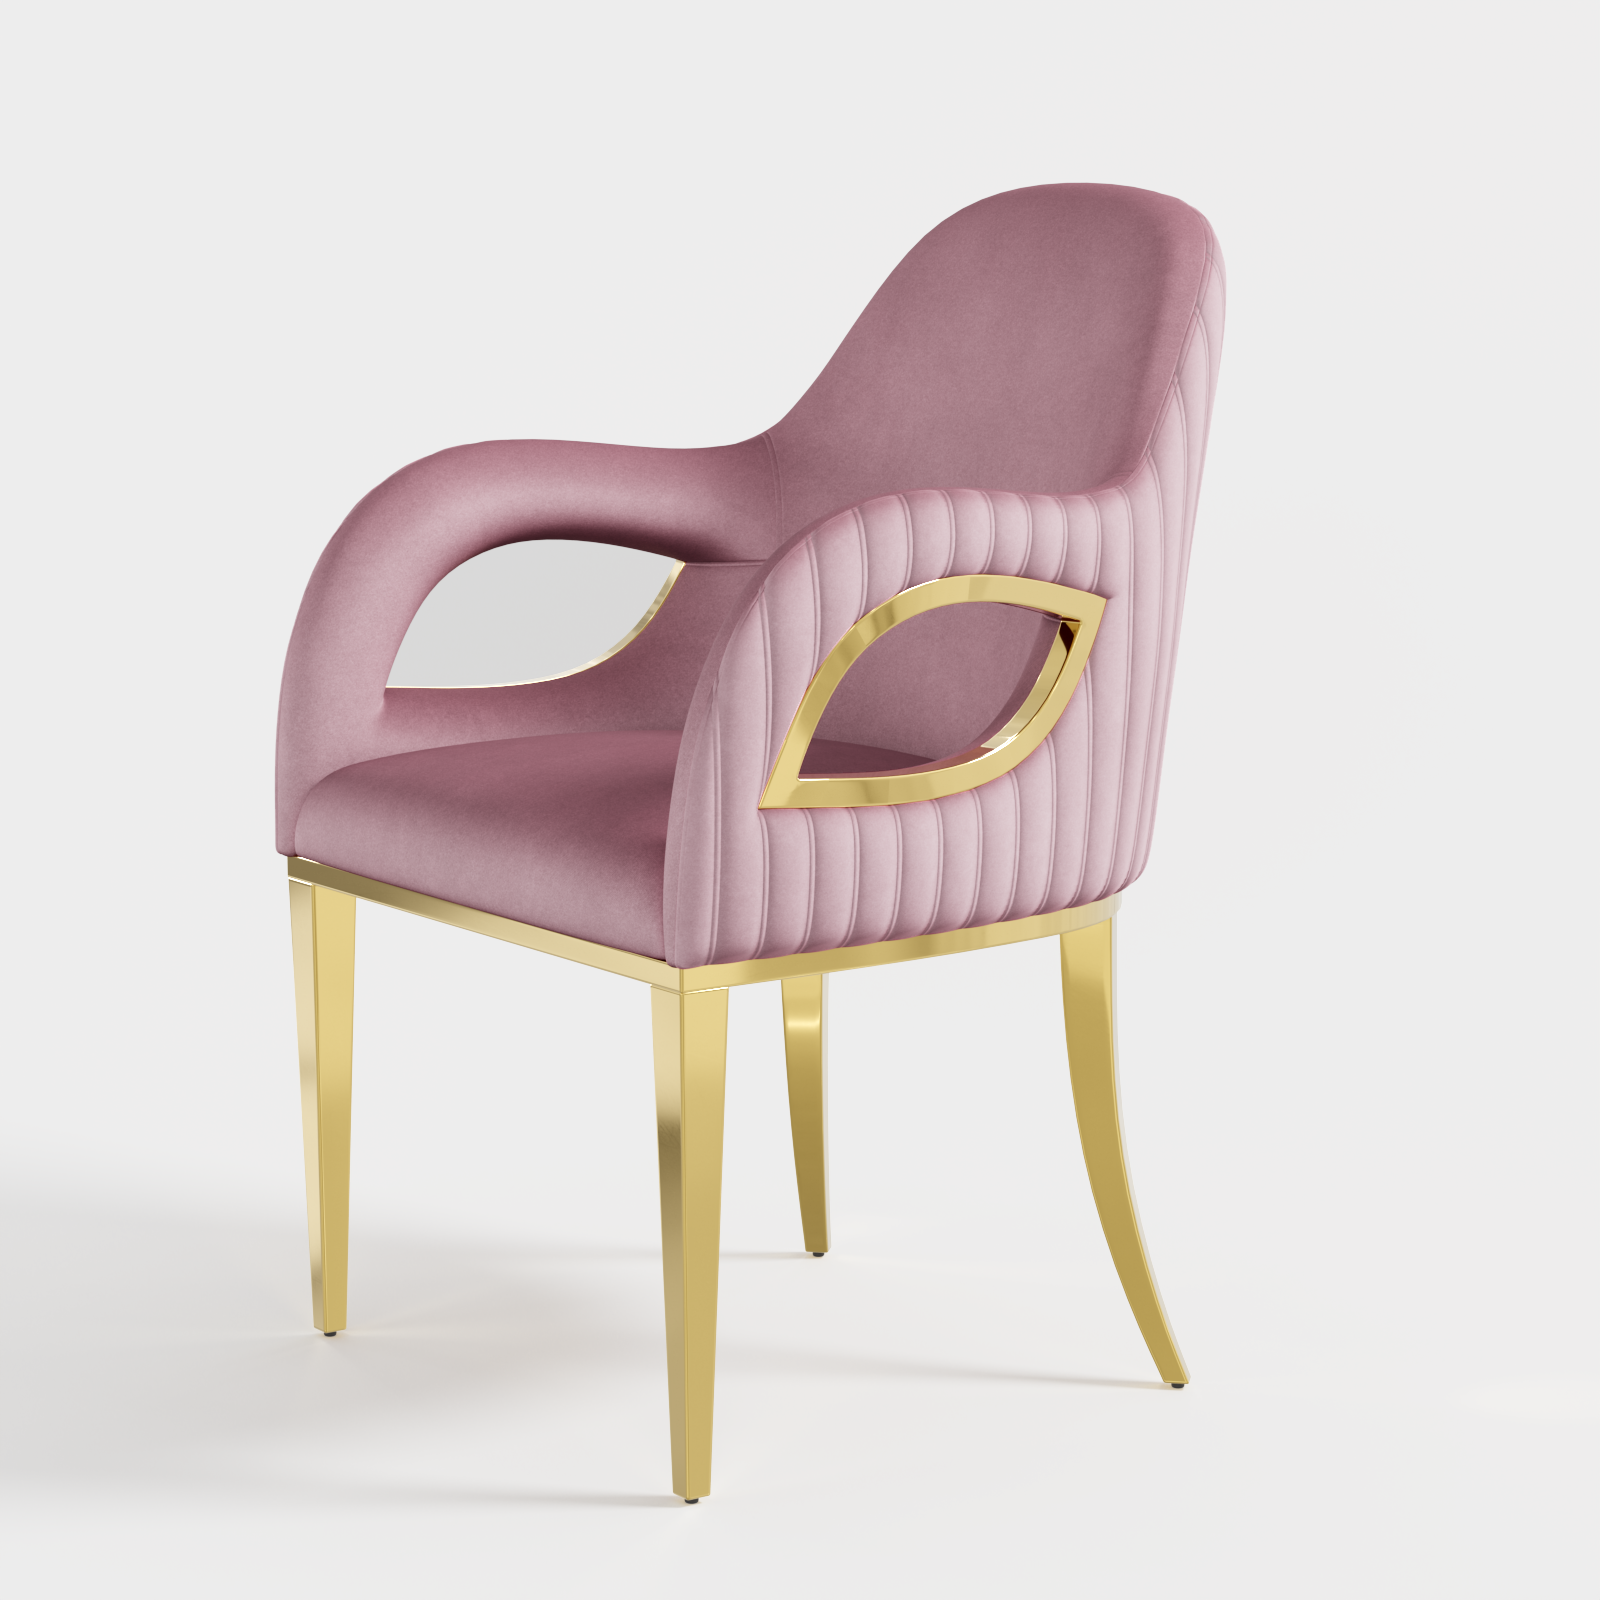 609-Set | AUZ Pink and Gold Dining room Sets for 6